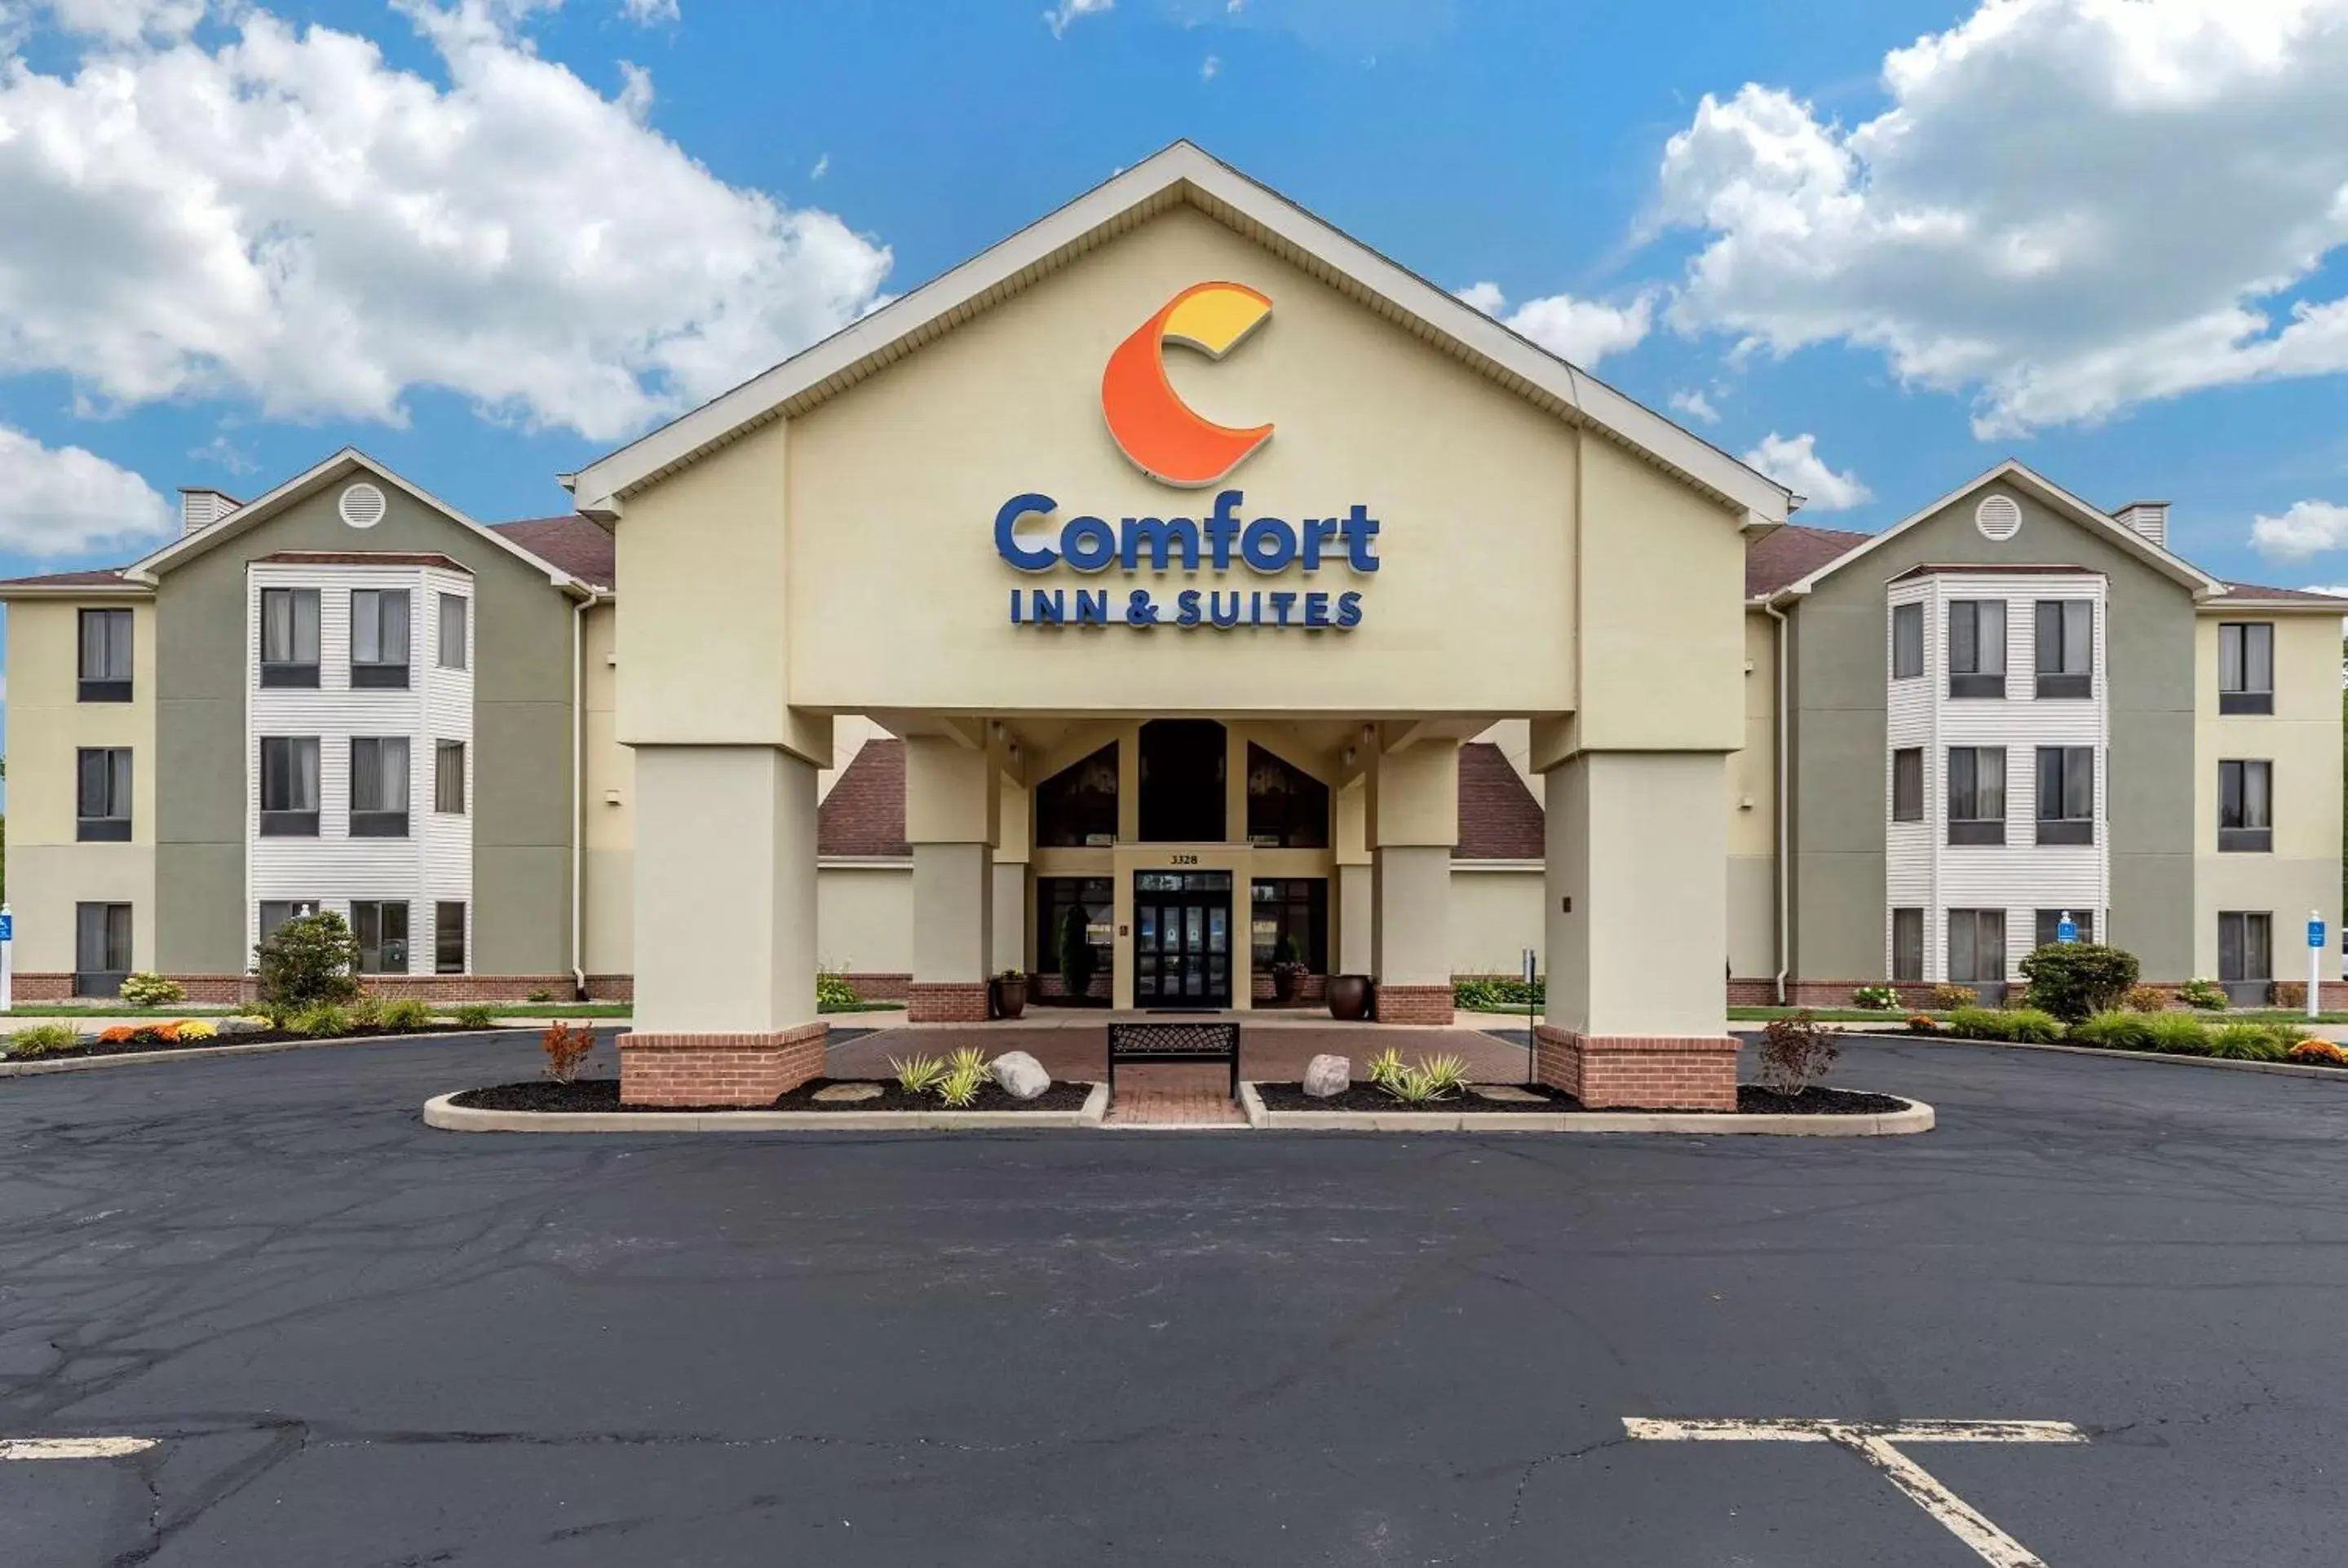 Property Building in Comfort Inn & Suites Warsaw near US-30